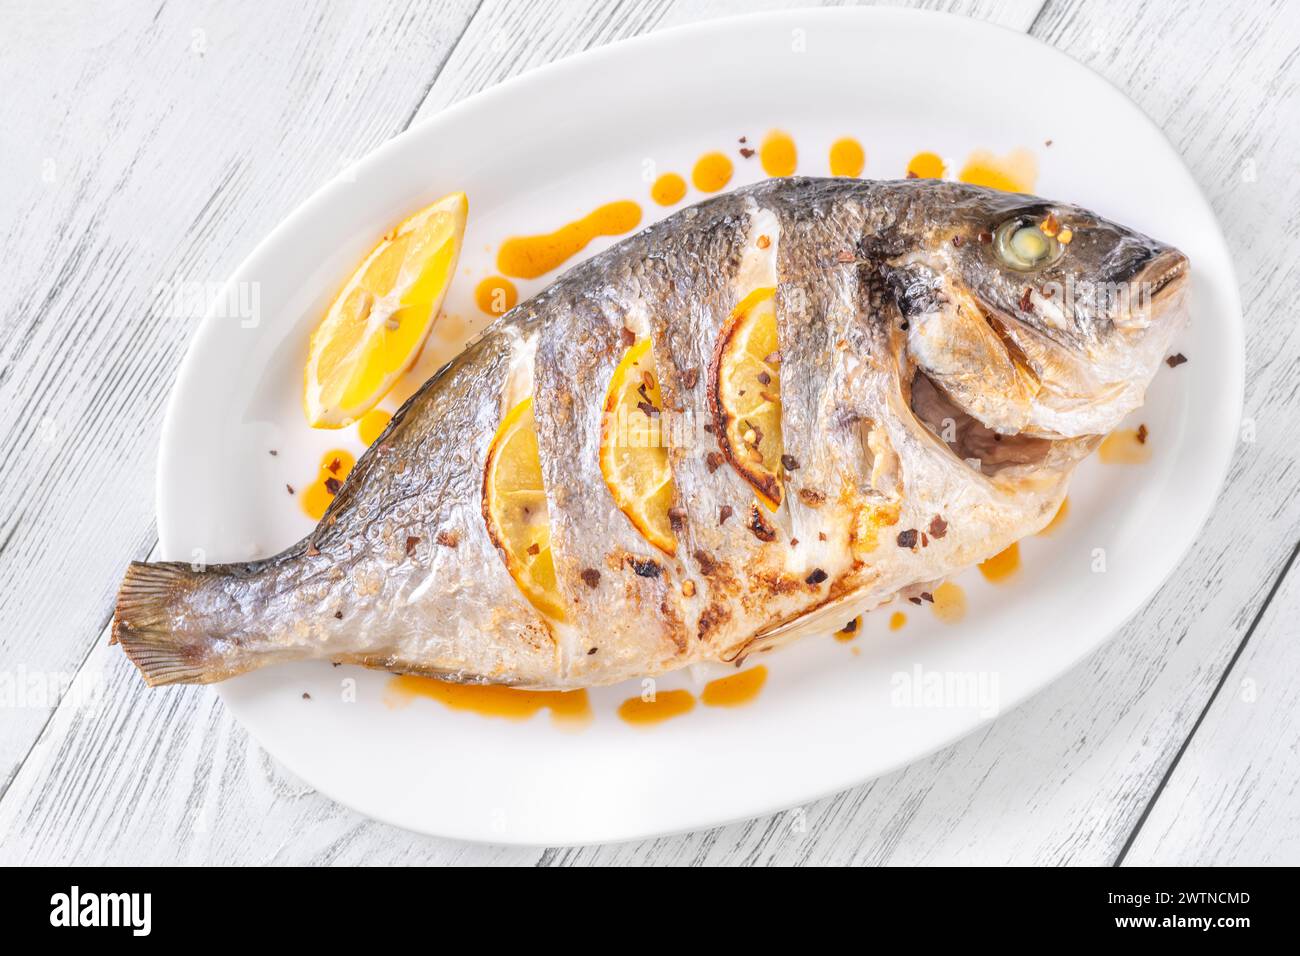 Baked dorado fish garnished with lemon and red oil Stock Photo